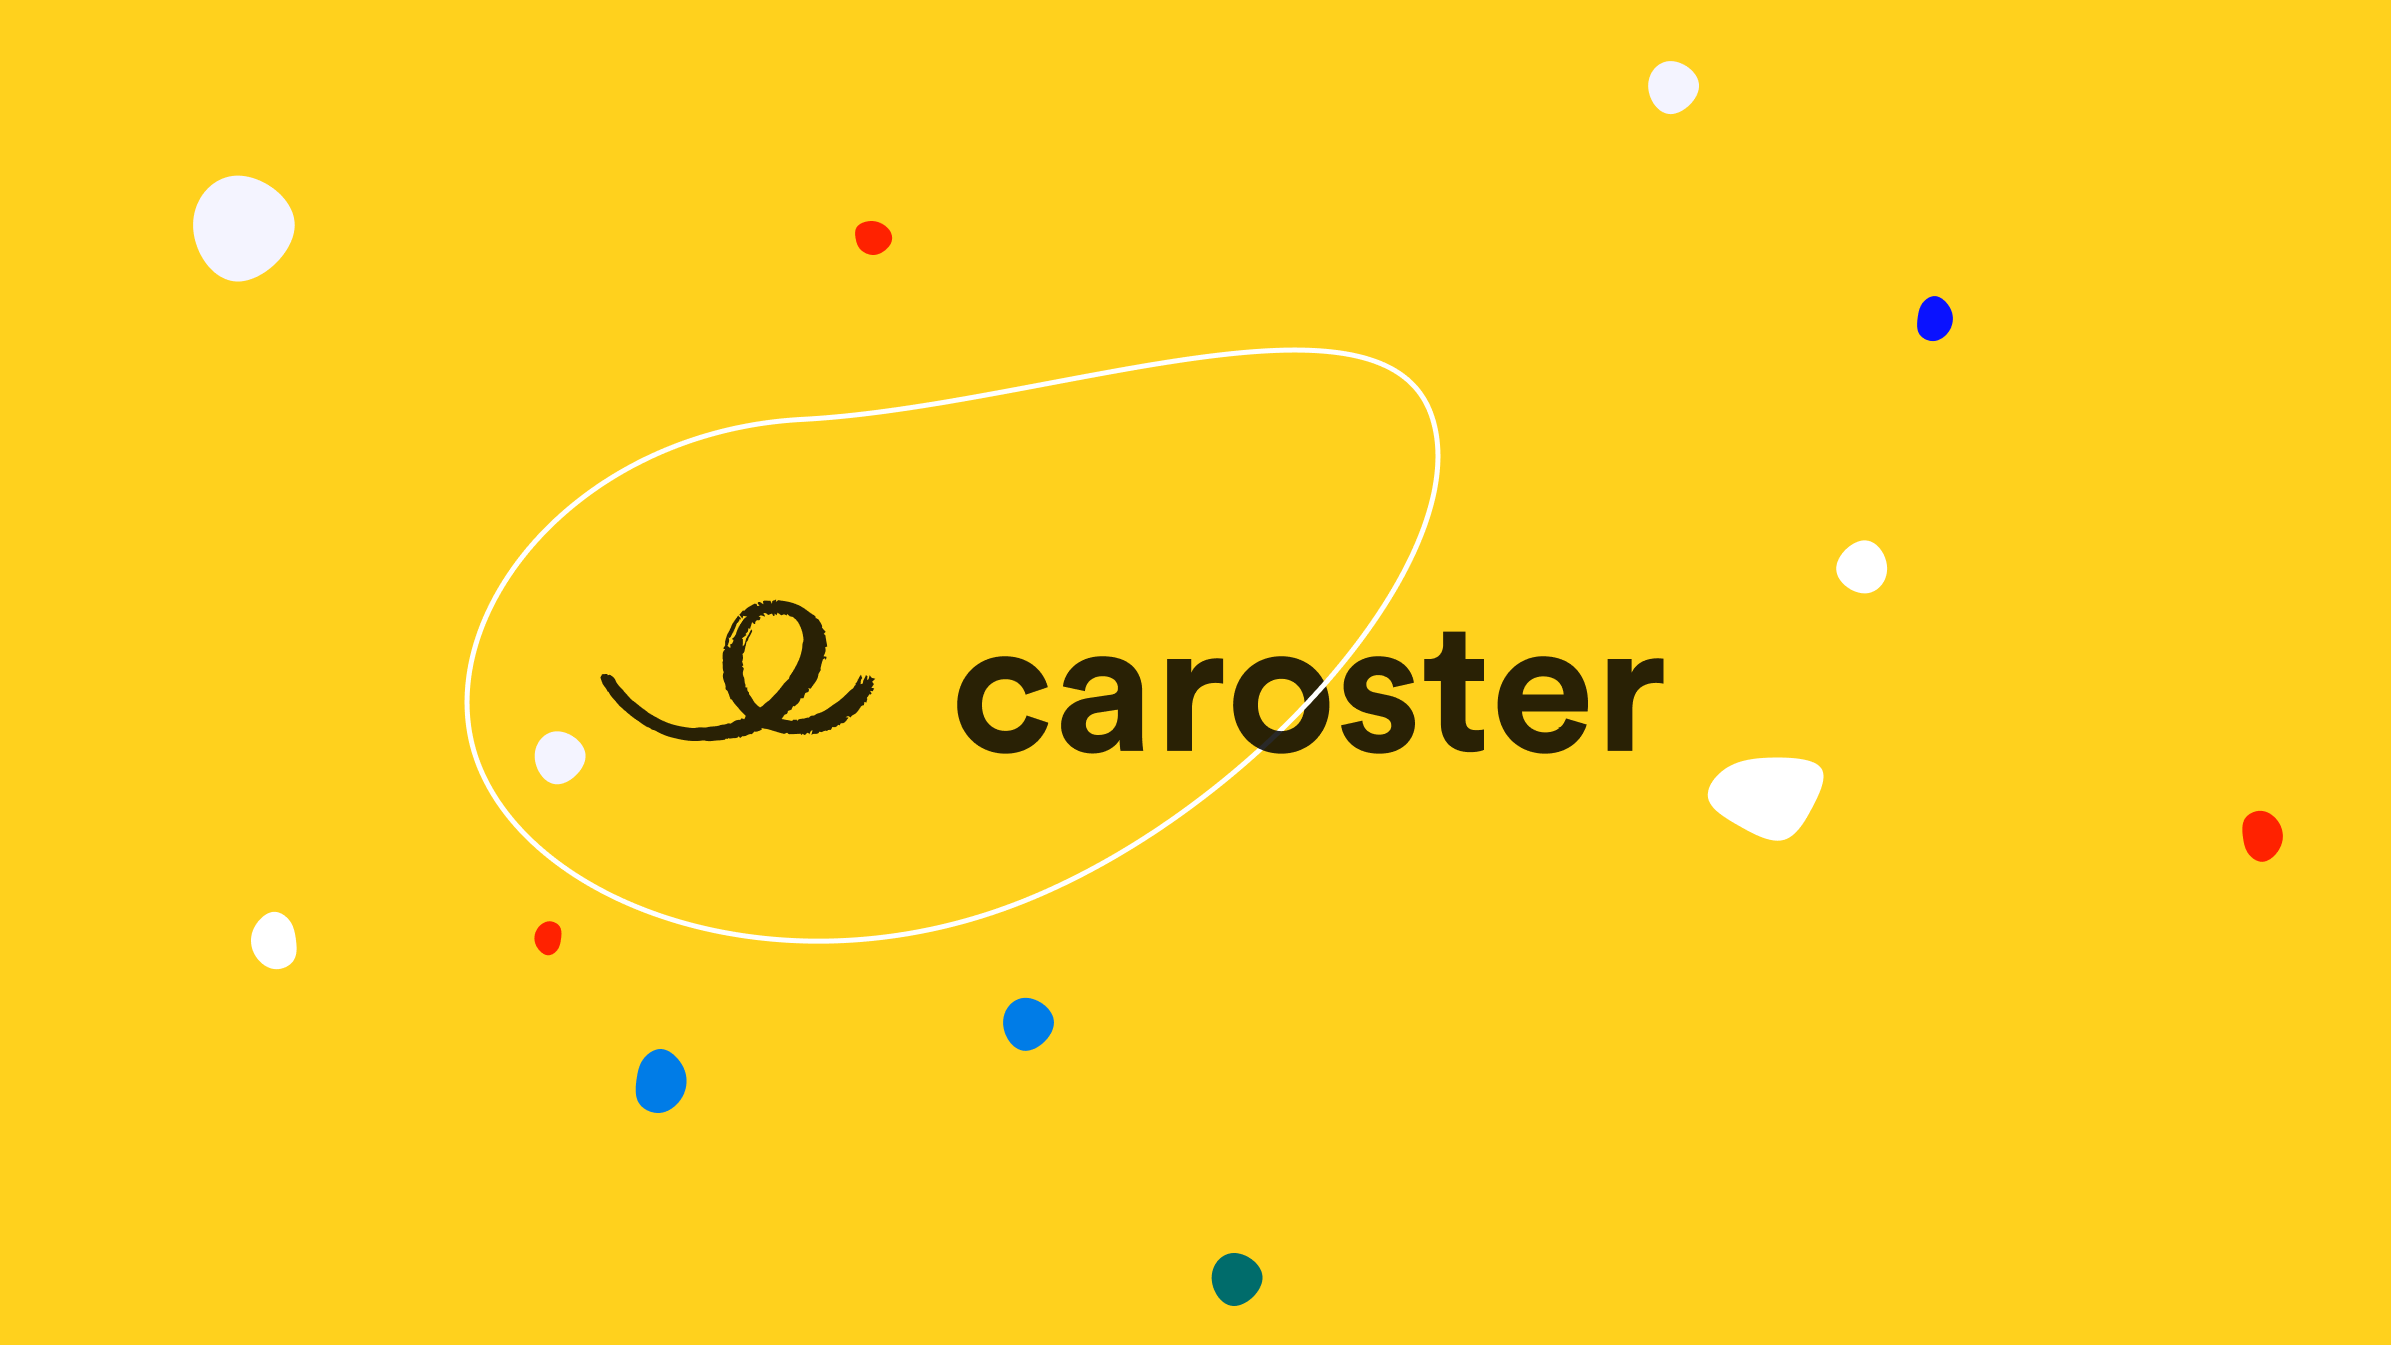 Caroster makes it easy to organize carpools to events, reducing environmental impact